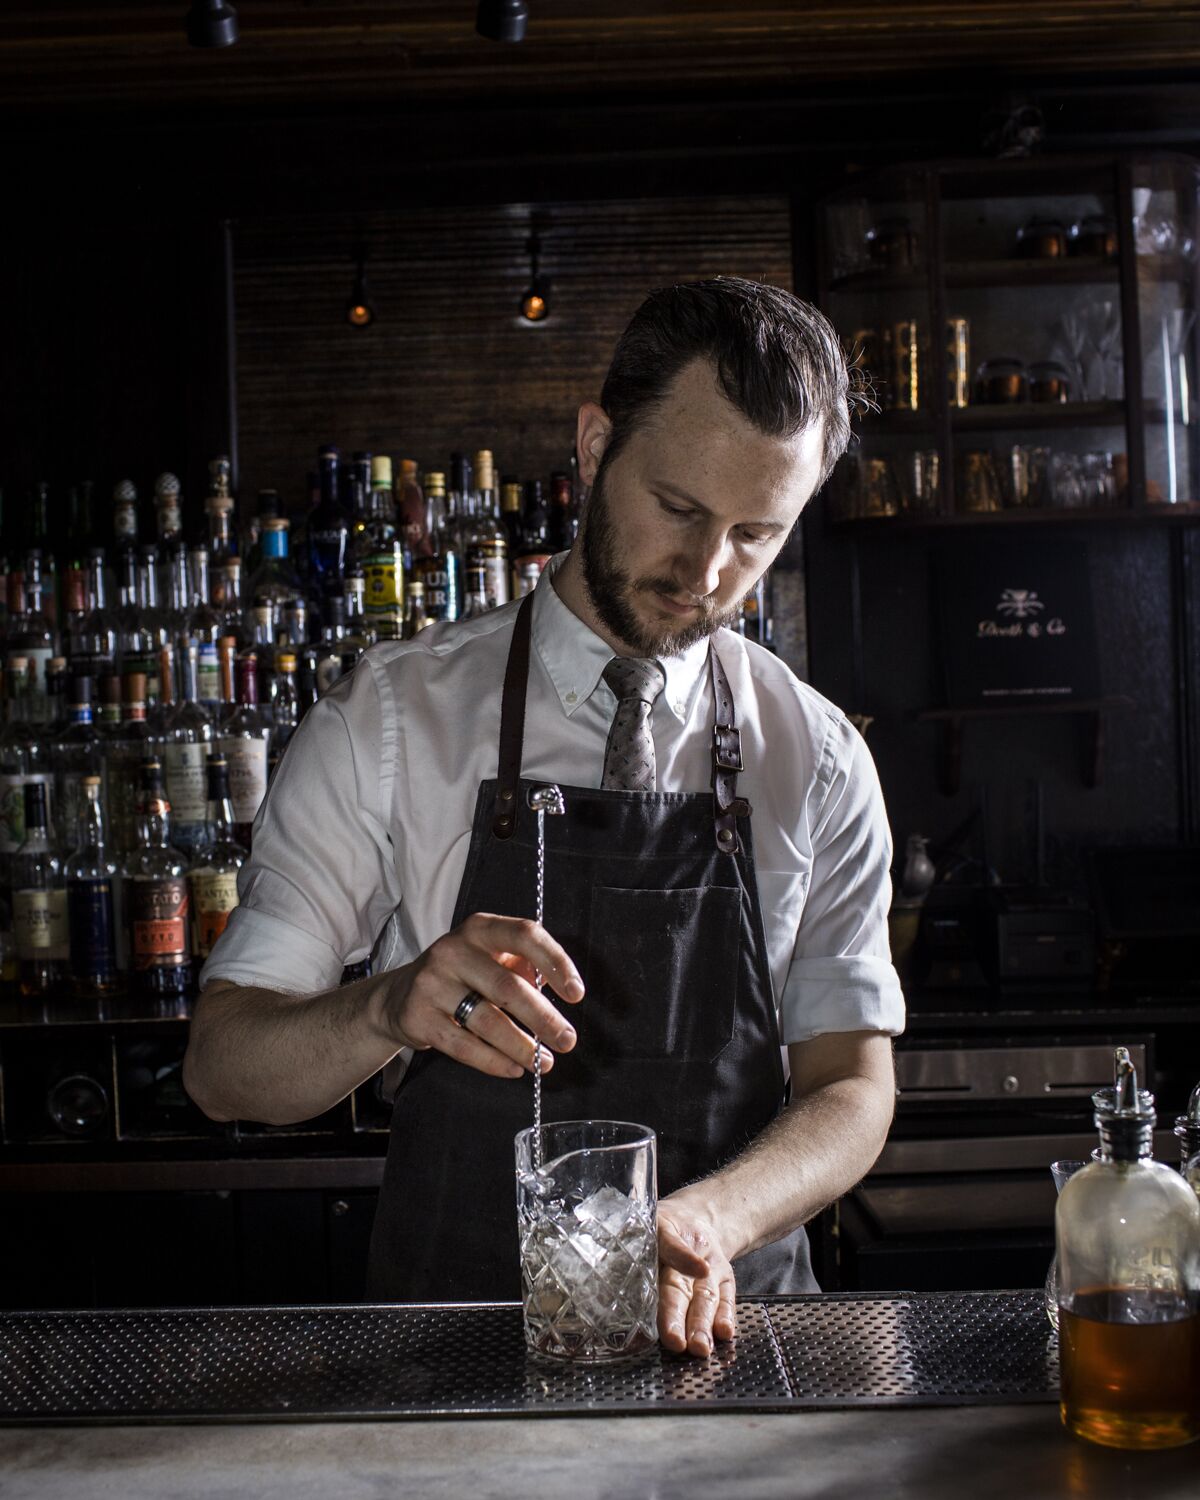 Bartender Matthew Belanger fixes a drink at Death & Co. The bar will open a location in L.A. in November.